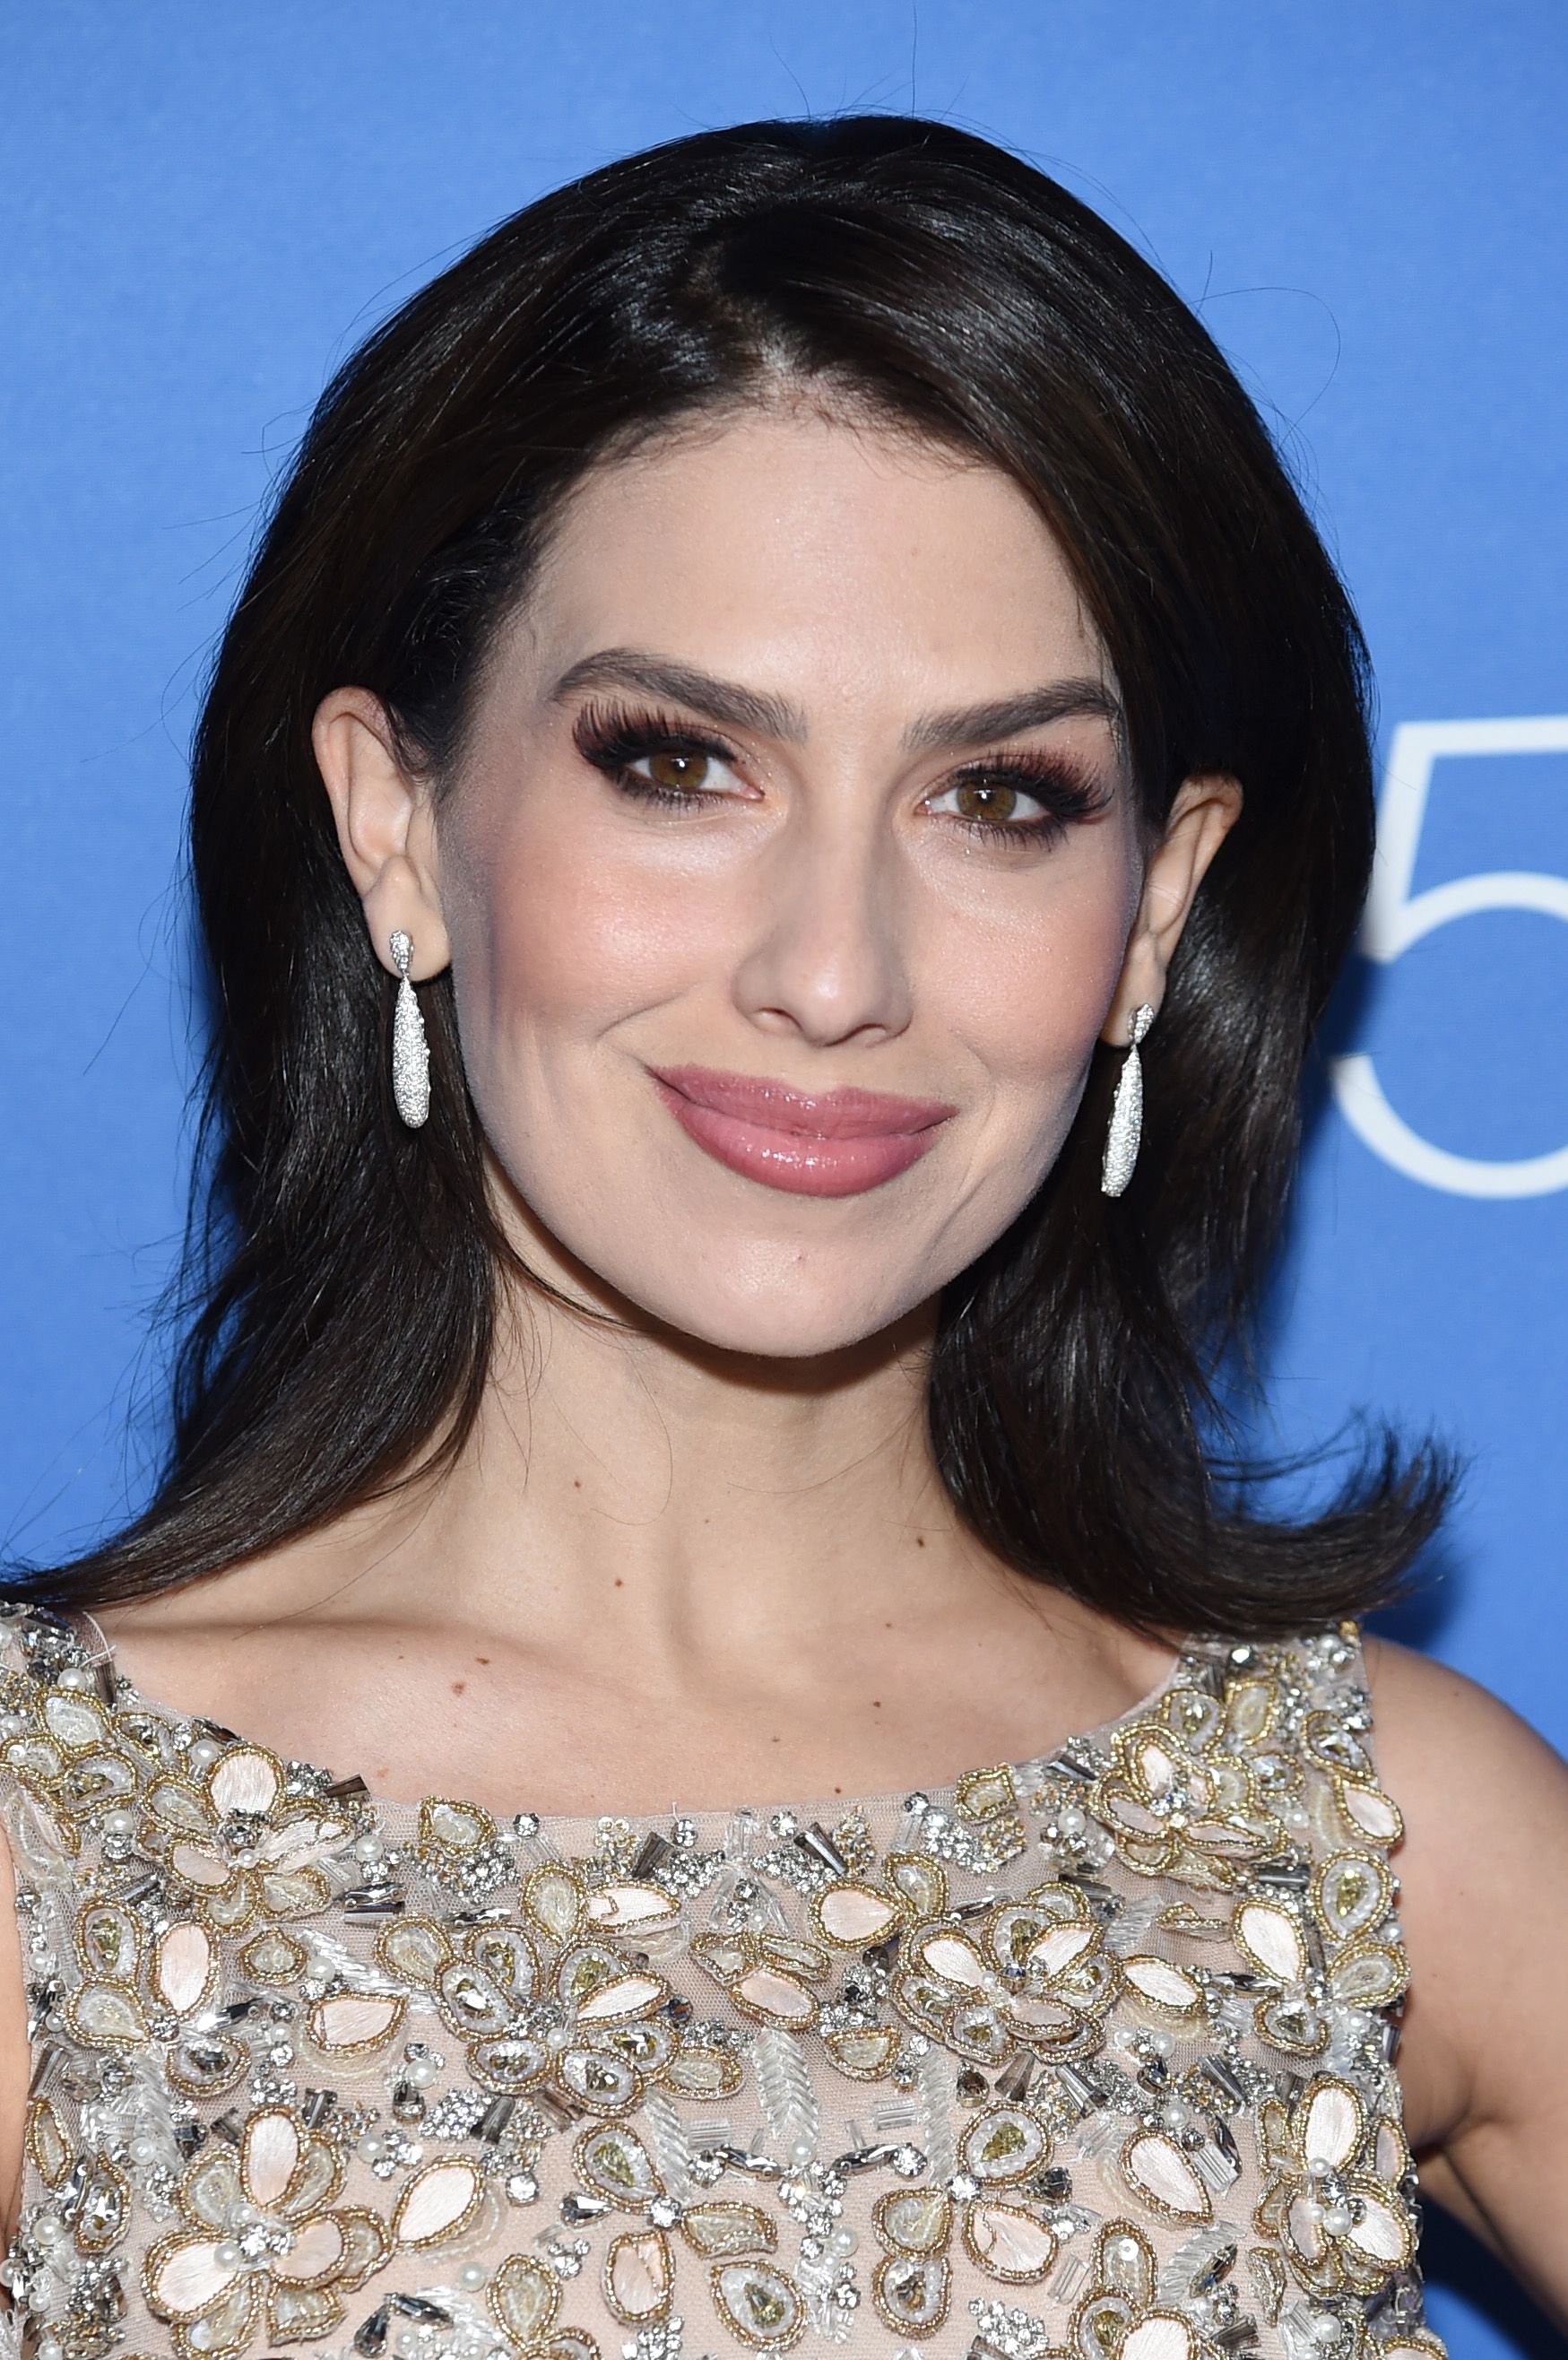  Hilaria Baldwin at the American Museum Of Natural History 2019 Gala at the American Museum of Natural History on November 21, 2019 | Getty Images